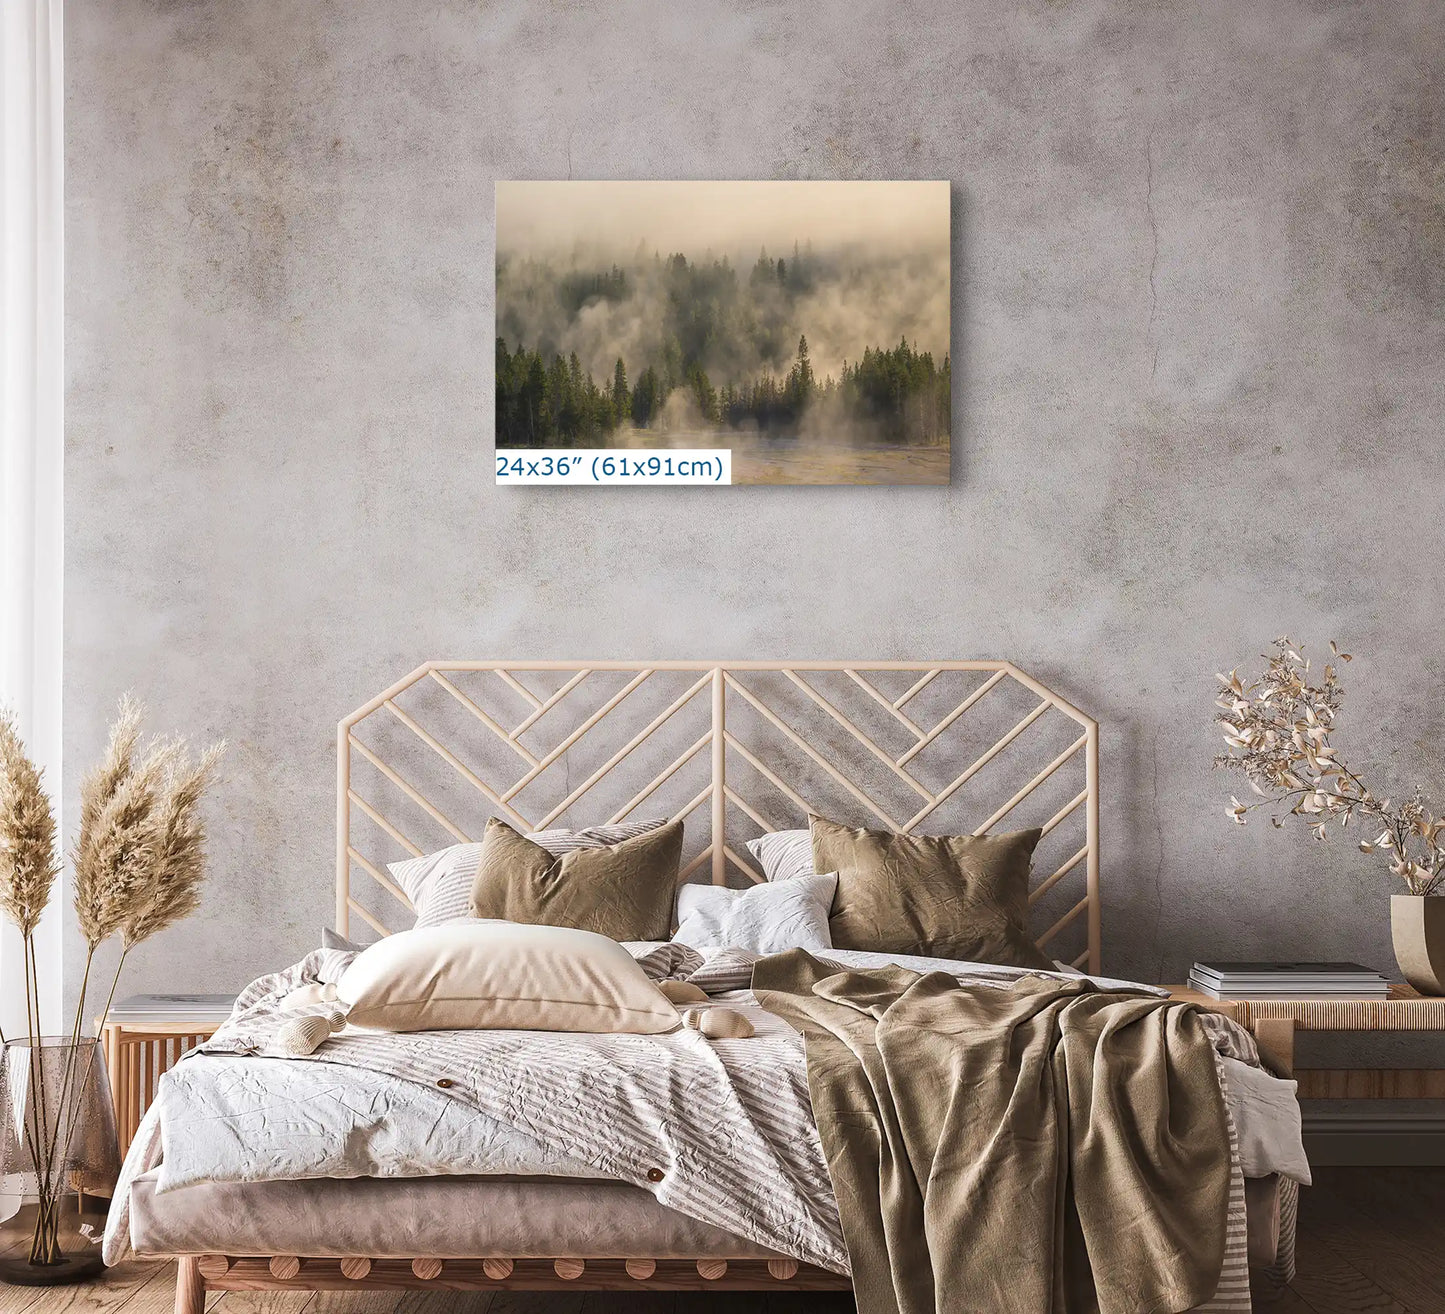 24x36 canvas print of a misty forest in Yellowstone above a bed, adding a peaceful natural scene to the bedroom decor.